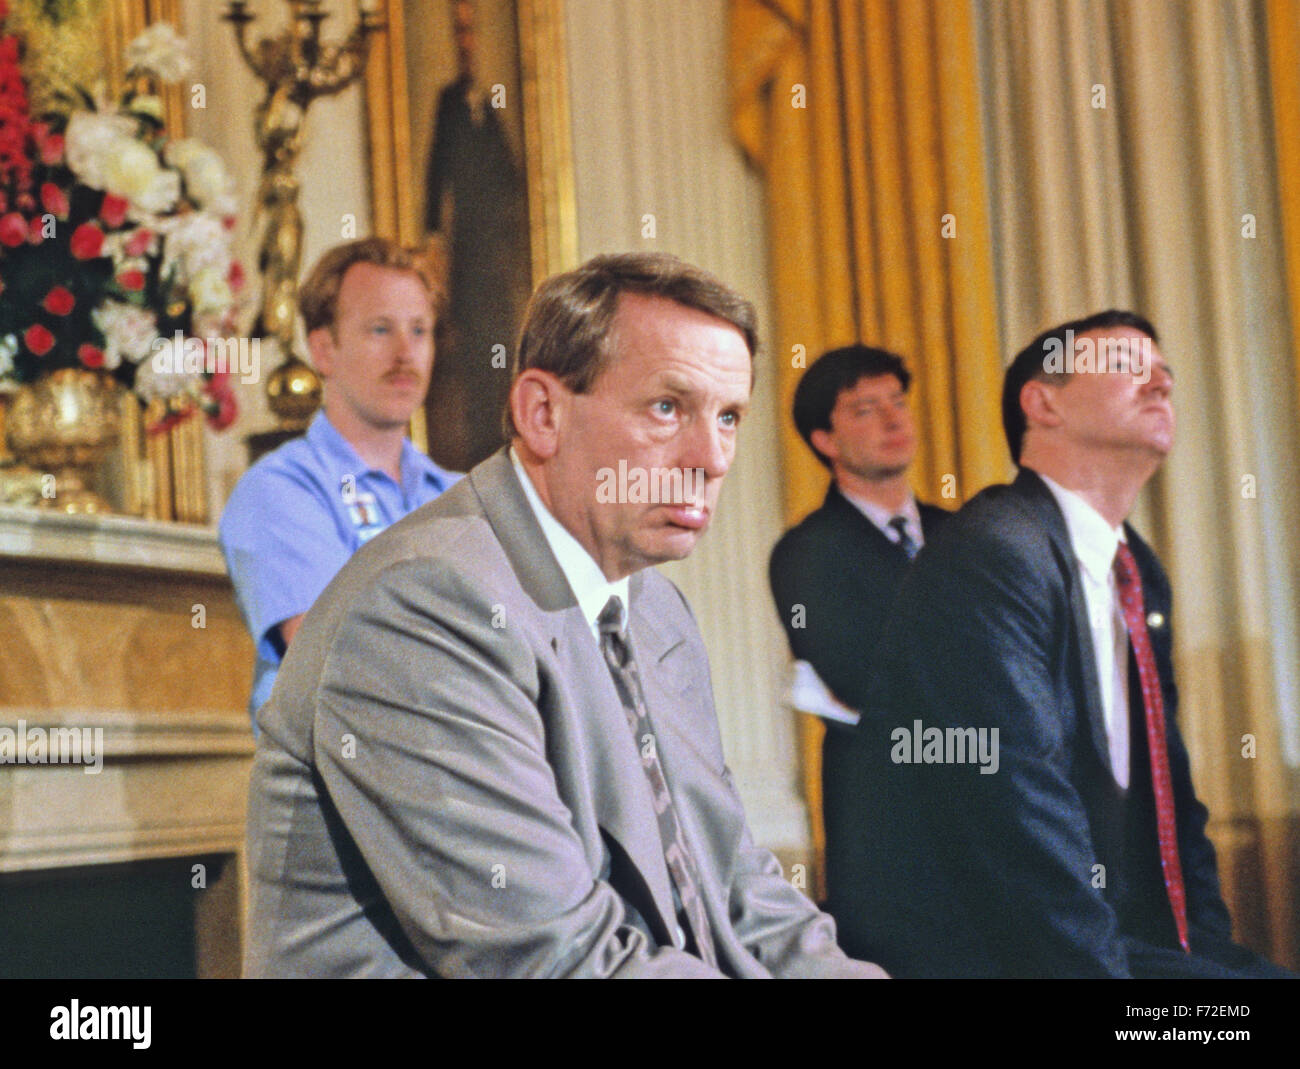 White House Chief of Staff Samuel K. Skinner looks on as United States President George H.W. Bush holds a press conference in the East Room of the White House in Washington, DC on June 4, 1992. In his opening remarks the President discussed the budget deficit and advocated for a balanced budget amendment to the US Constitution. Credit: Ron Sachs/CNP - NO WIRE SERVICE - Stock Photo